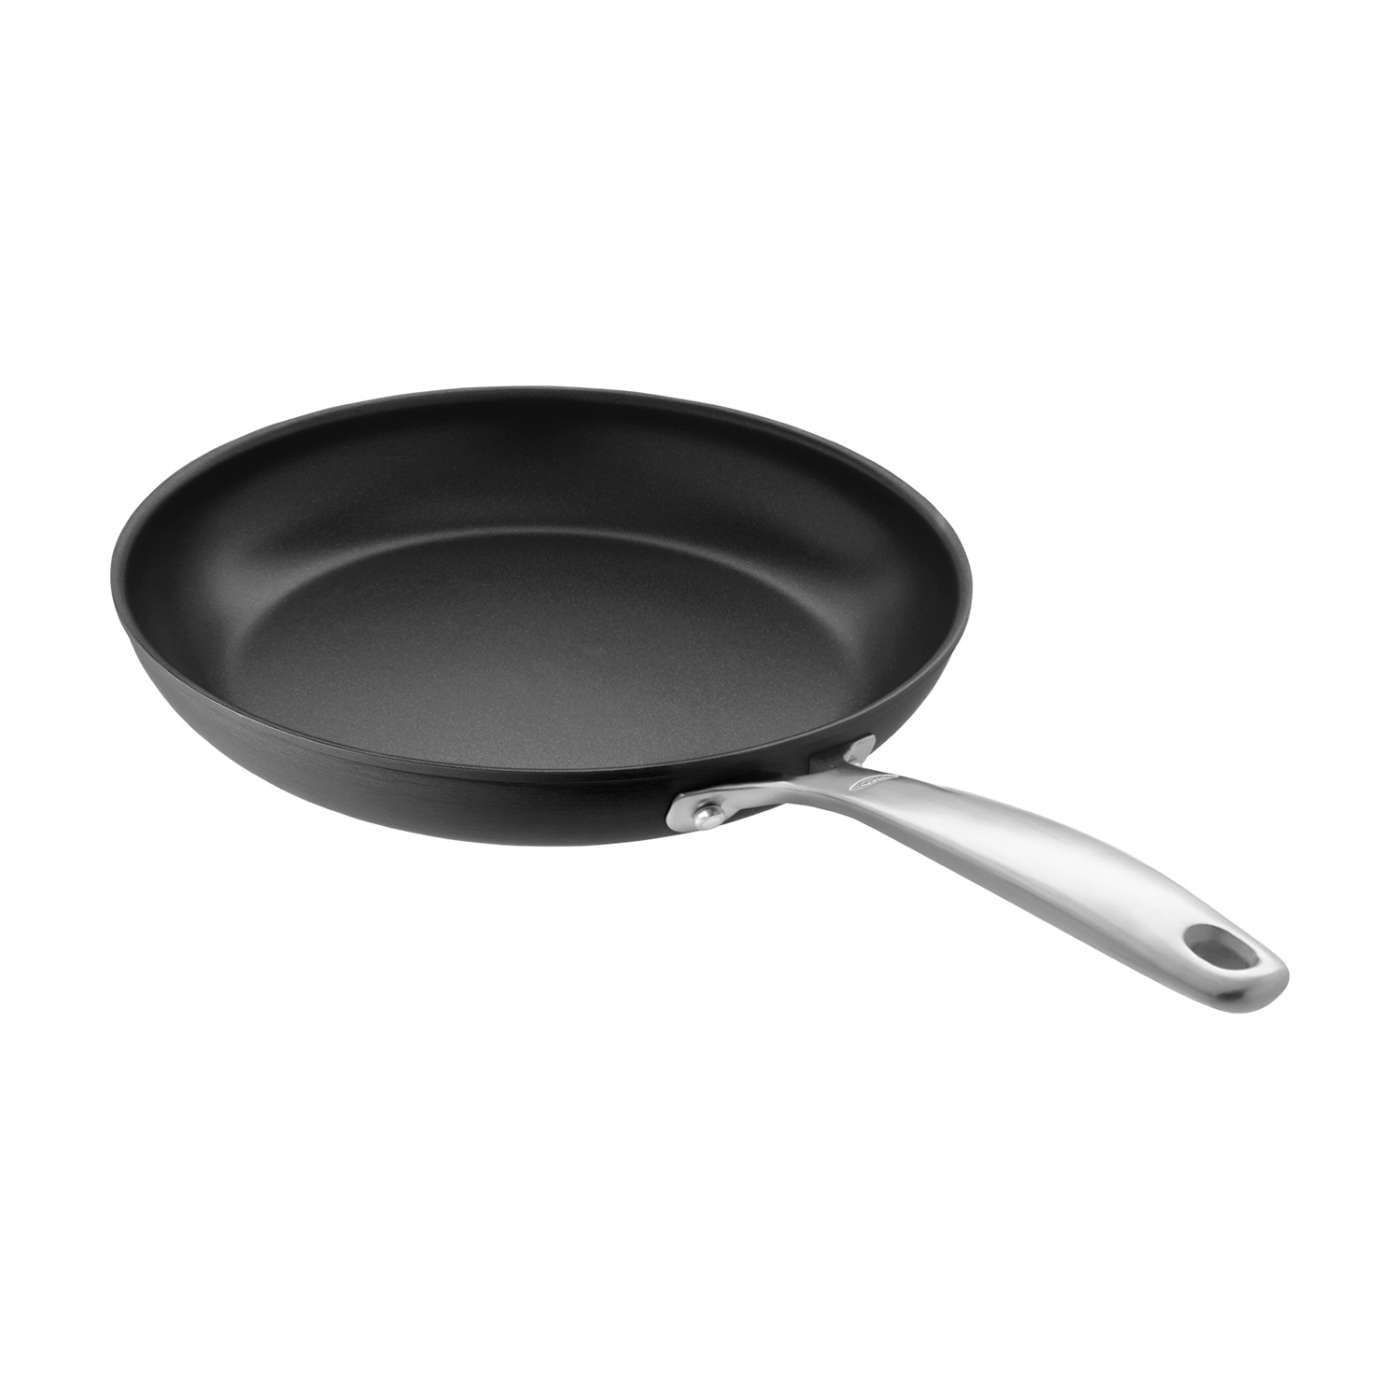  OXO Good Grips Pro 10 Frying Pan Skillet, 3-Layered